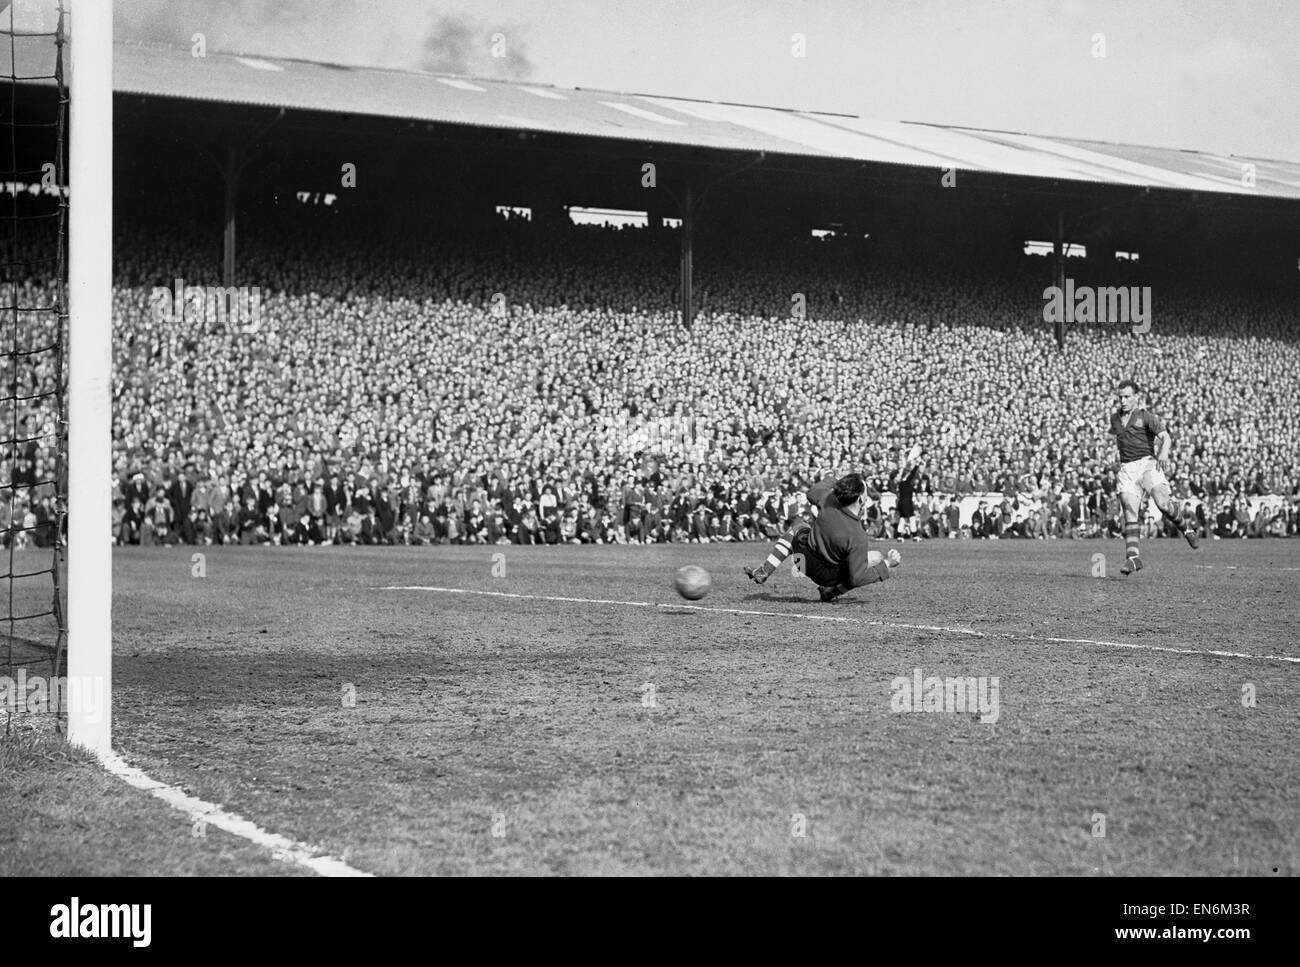 English League Division Two match at Elland Road. Leeds United 2 v Bristol Rovers 1. Leeds captain John Charles nets the ball past goalkeeper Radford from a pass by Overfield but the goal was disallowed for offside. 21st April 1956. Stock Photo